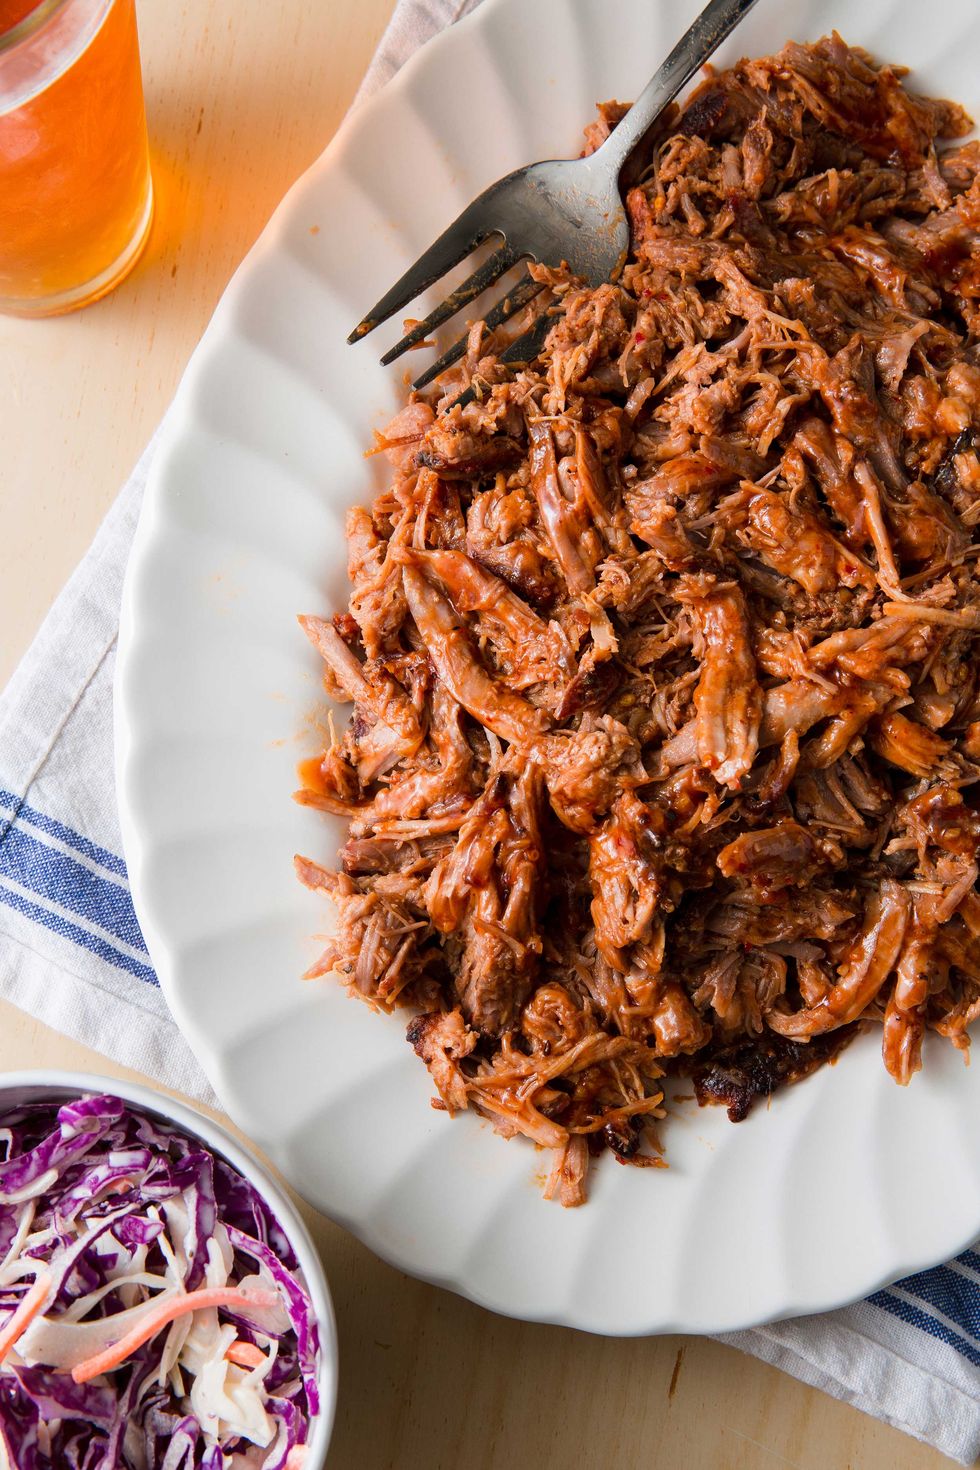 Pulled Pork Recipe (Slow Cooker or Oven Roasted) - The Food Charlatan